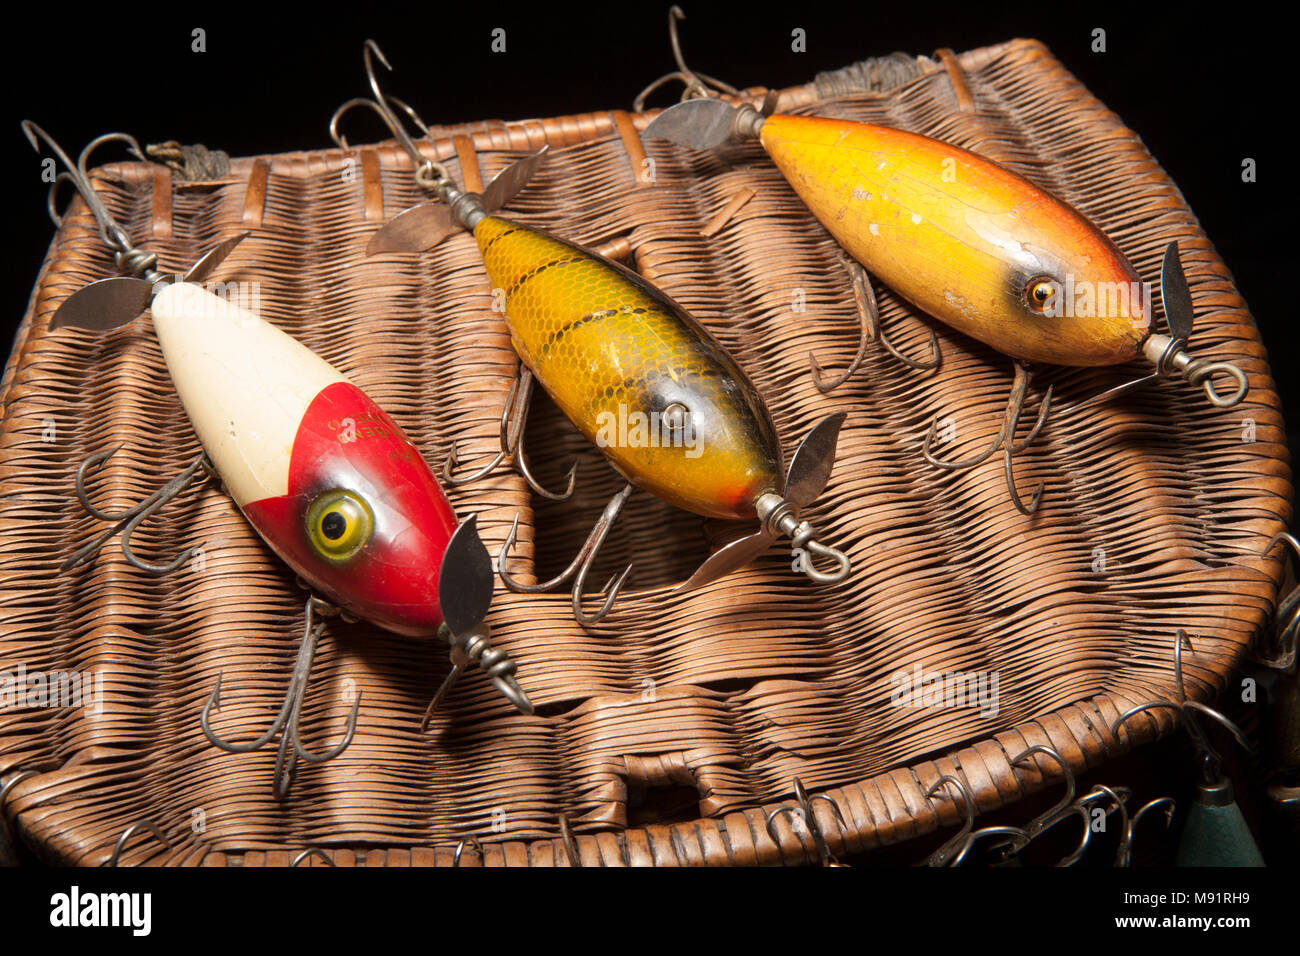 South Bend Mark 1 Trout Net — Vintage Anglers